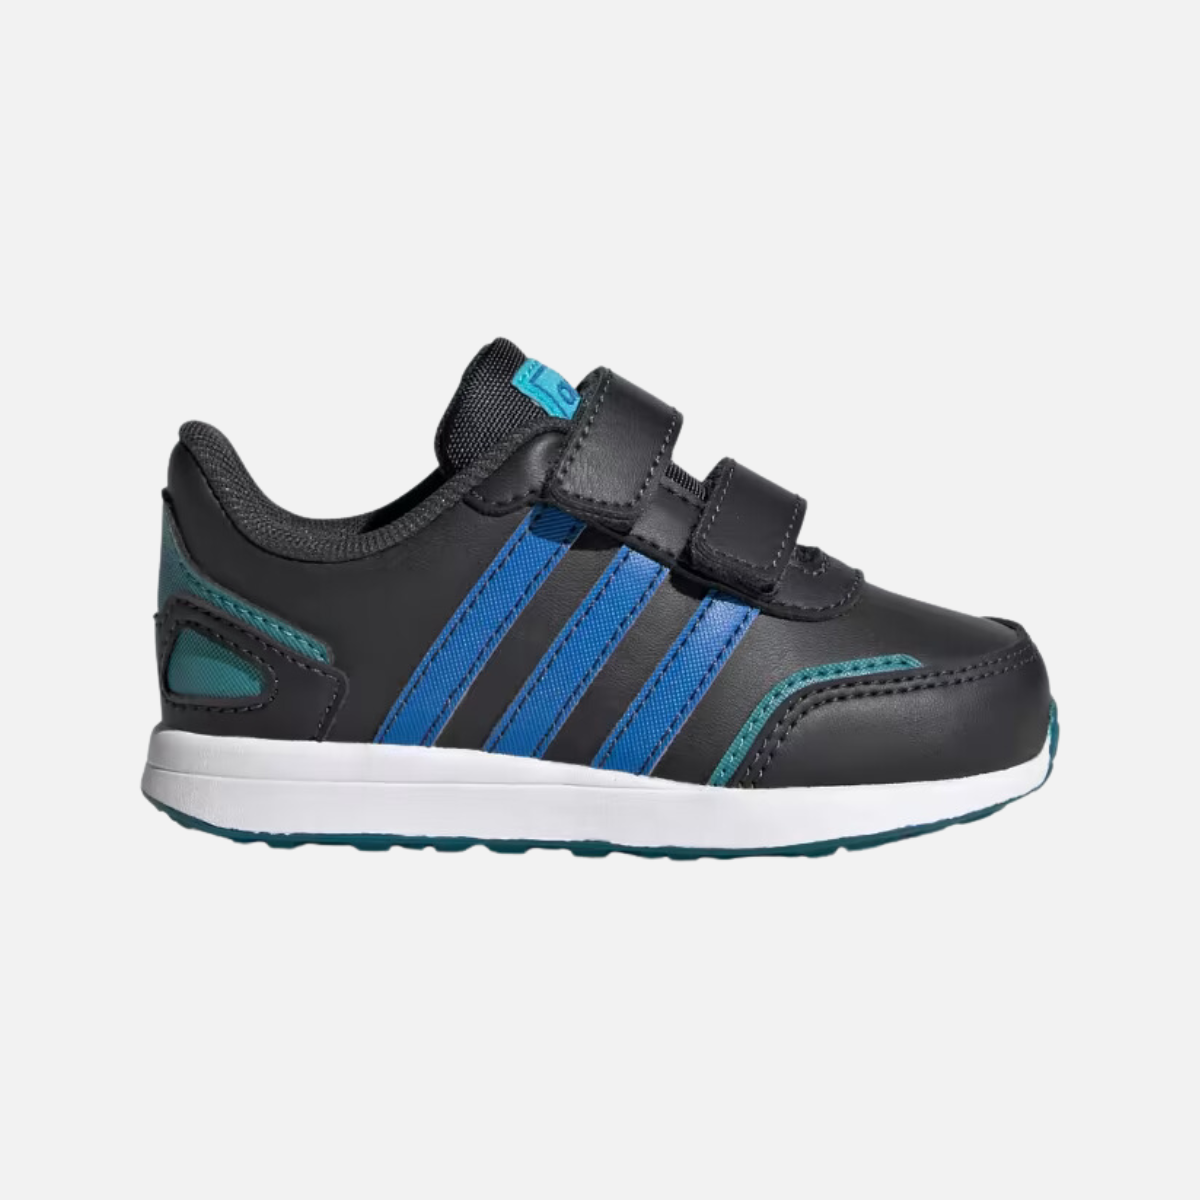 Adidas VS Switch 3 Lifestyle Running Hook and Loop Straps Kids Unisex Shoes (0 -3 year) -Carbon/Bright Royal/Arctic Fusion